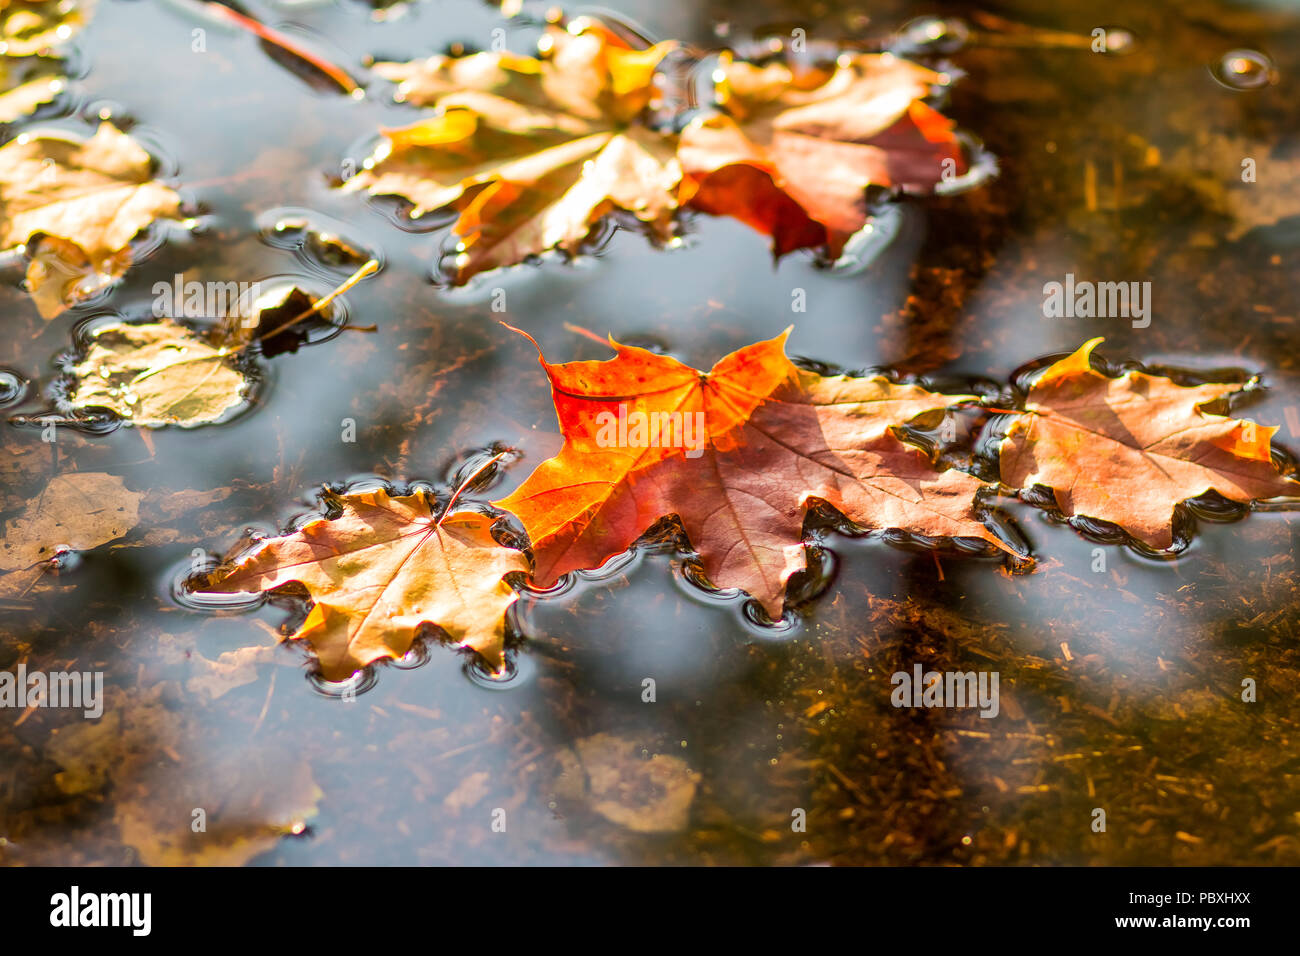 An image of scattered autumn leaves on the water, their vibrant